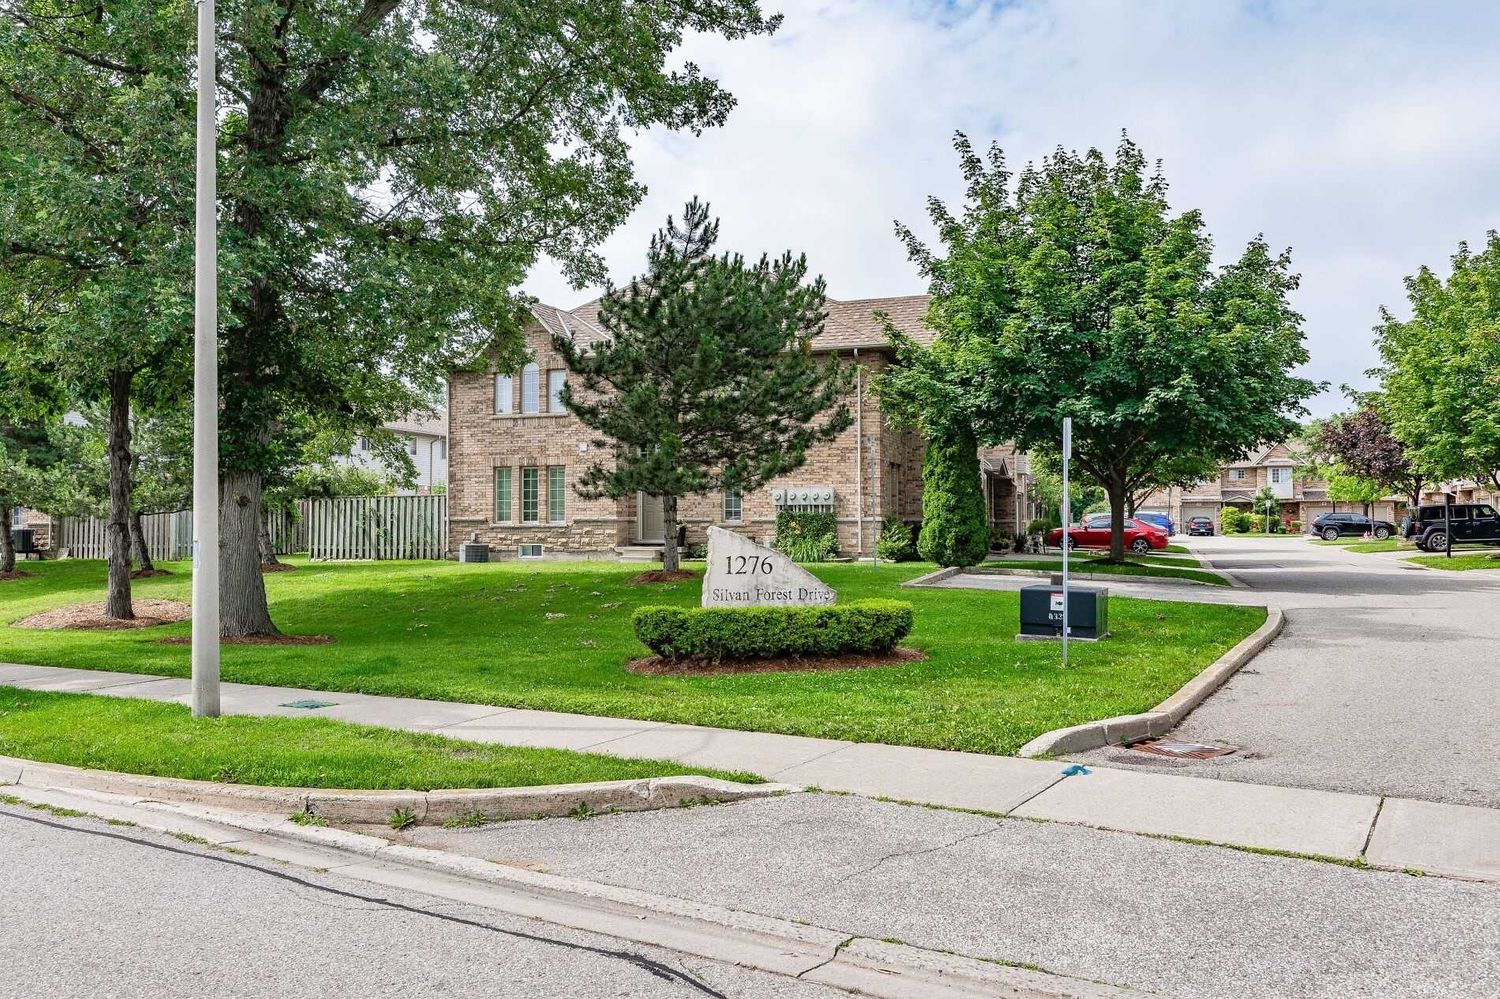 1276 Silvan Forest Drive. 1276 Silvan Forest Drive Townhomes is located in  Burlington, Toronto - image #1 of 2